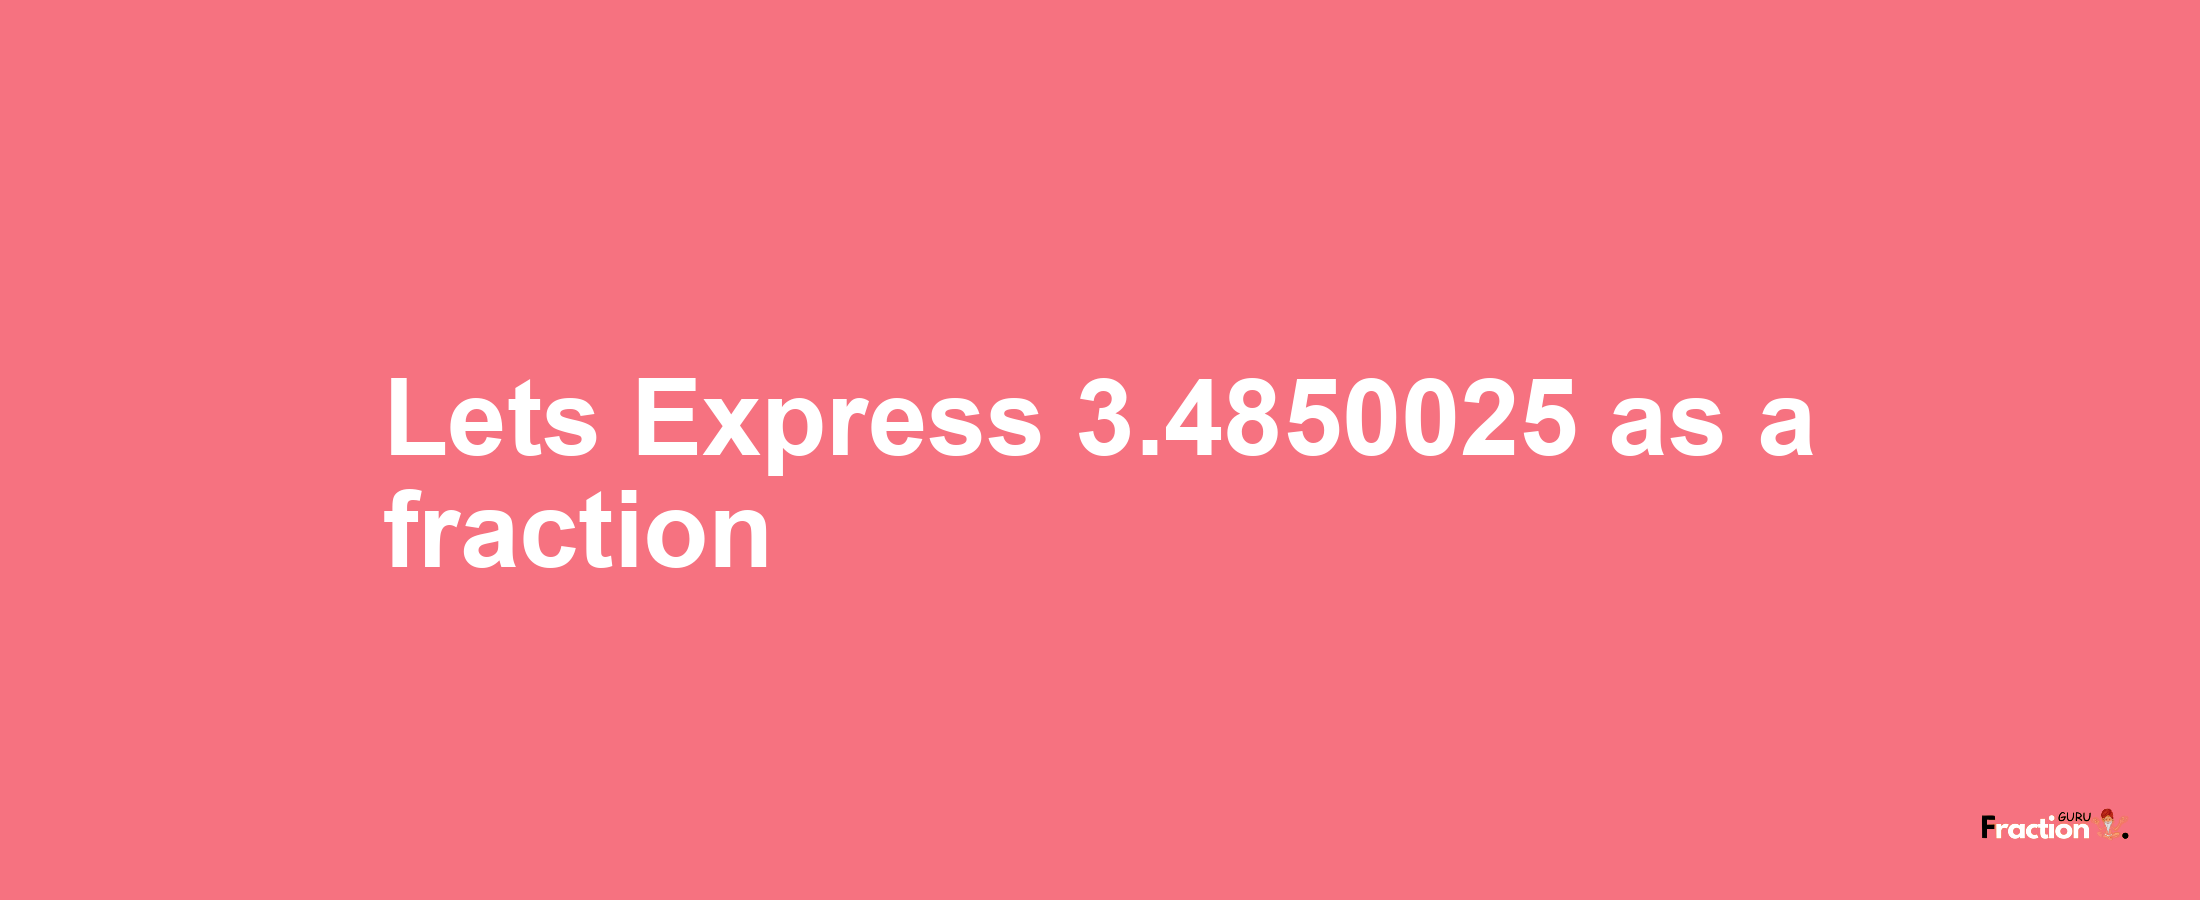 Lets Express 3.4850025 as afraction